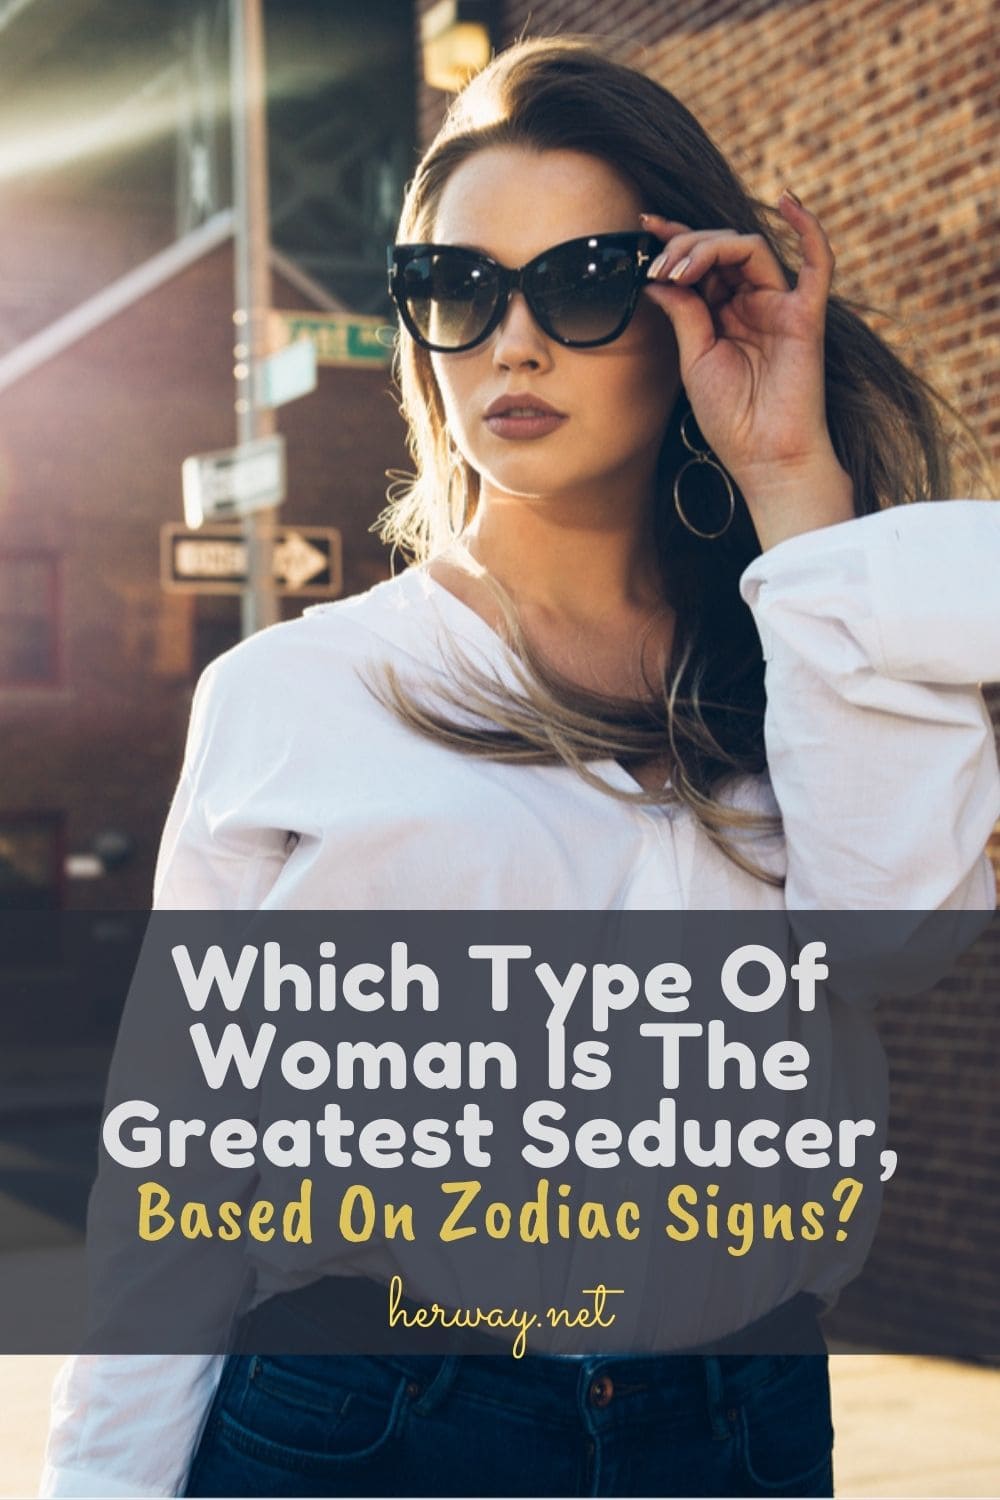 Which Type Of Woman Is The Greatest Seducer, Based On Zodiac Signs?